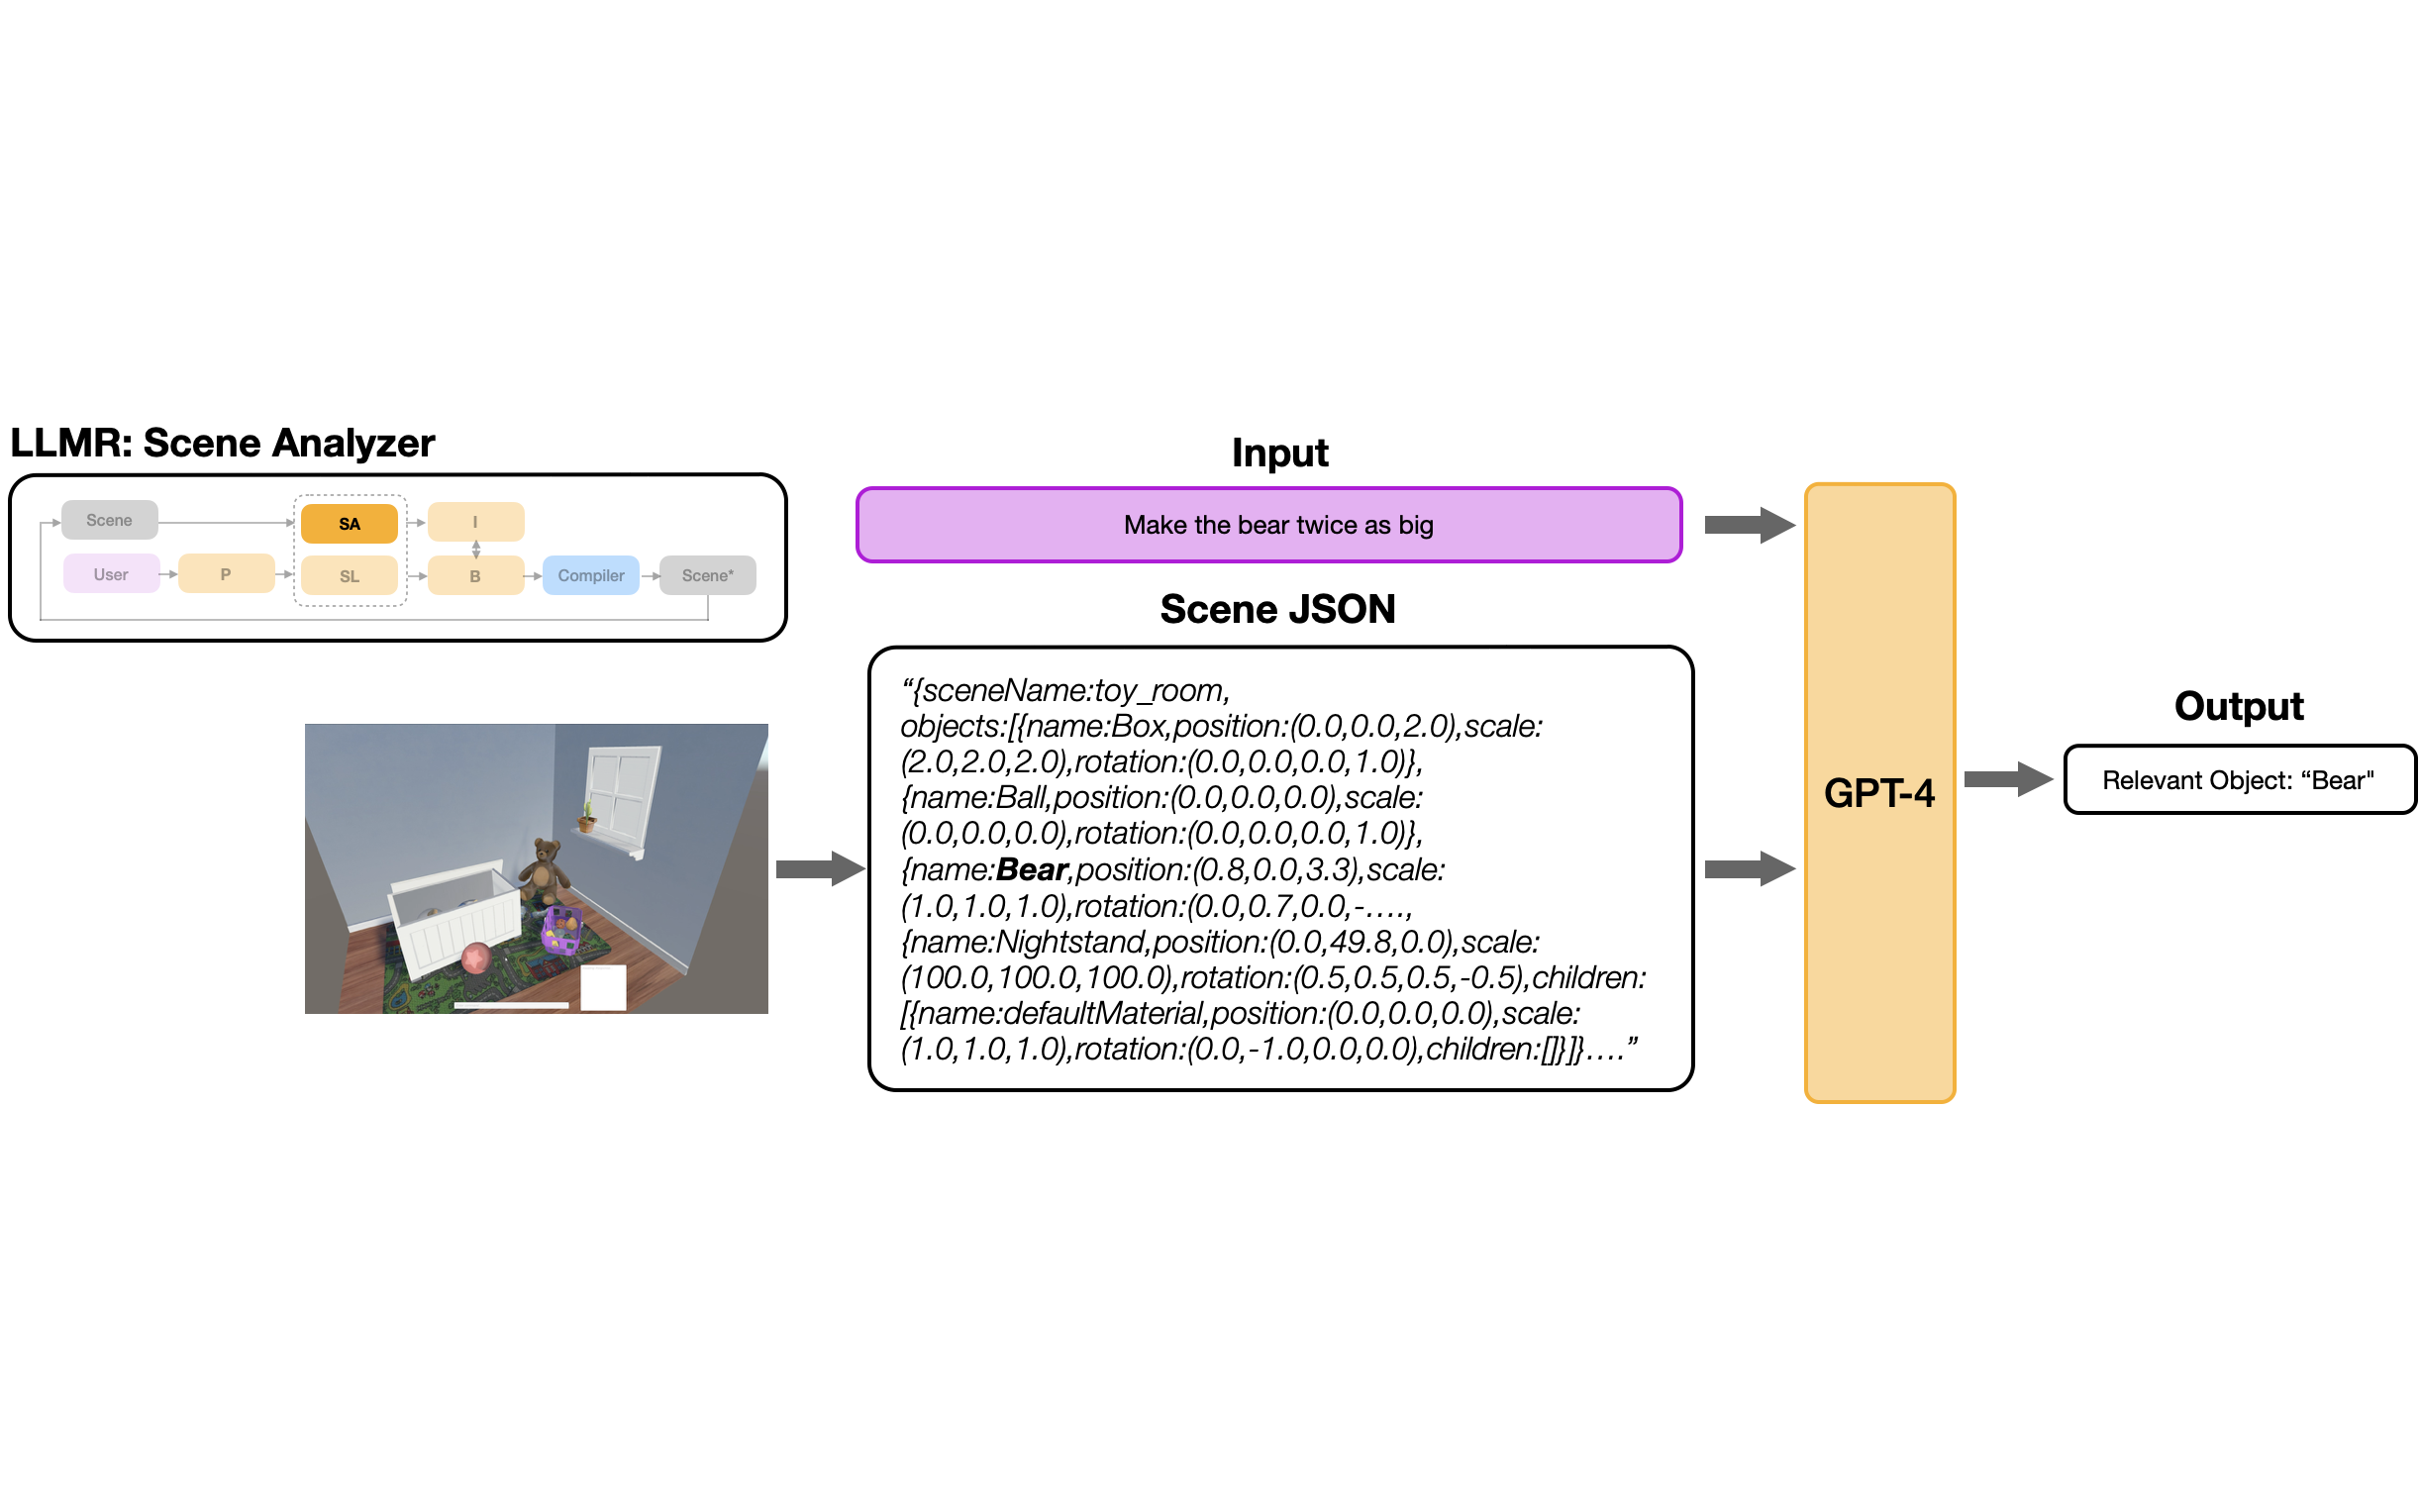 This figure shows the process of the LLMR Scene Analyzer. The input is a virtual scene in JSON format and the user request. The output is a filtered summary of the scene, which is used for conditioning subsequent modules. This process optimizes the utilization of the language model's fixed context window and enhances focus on objects relevant to the user prompt. 